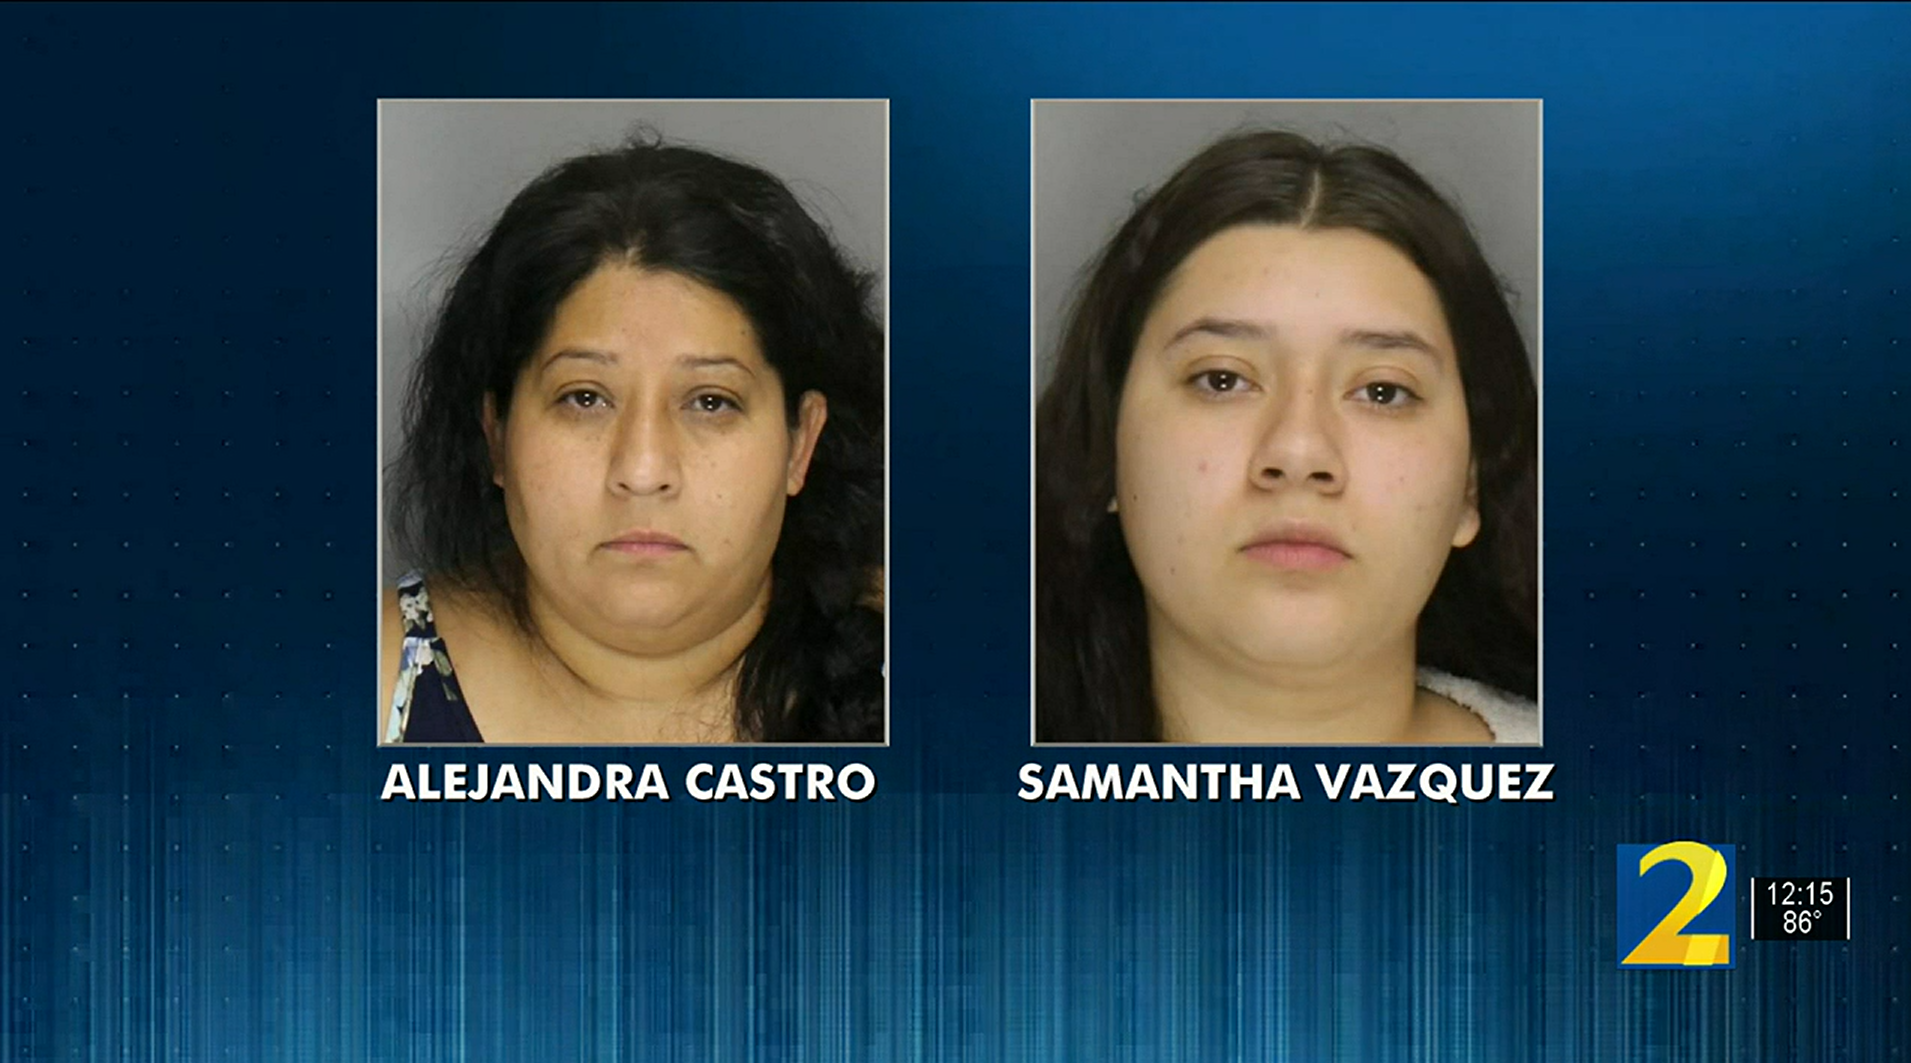 Alejandra Castro, 41 and Samantha Vasquez, 20, have both been charged with malice murder